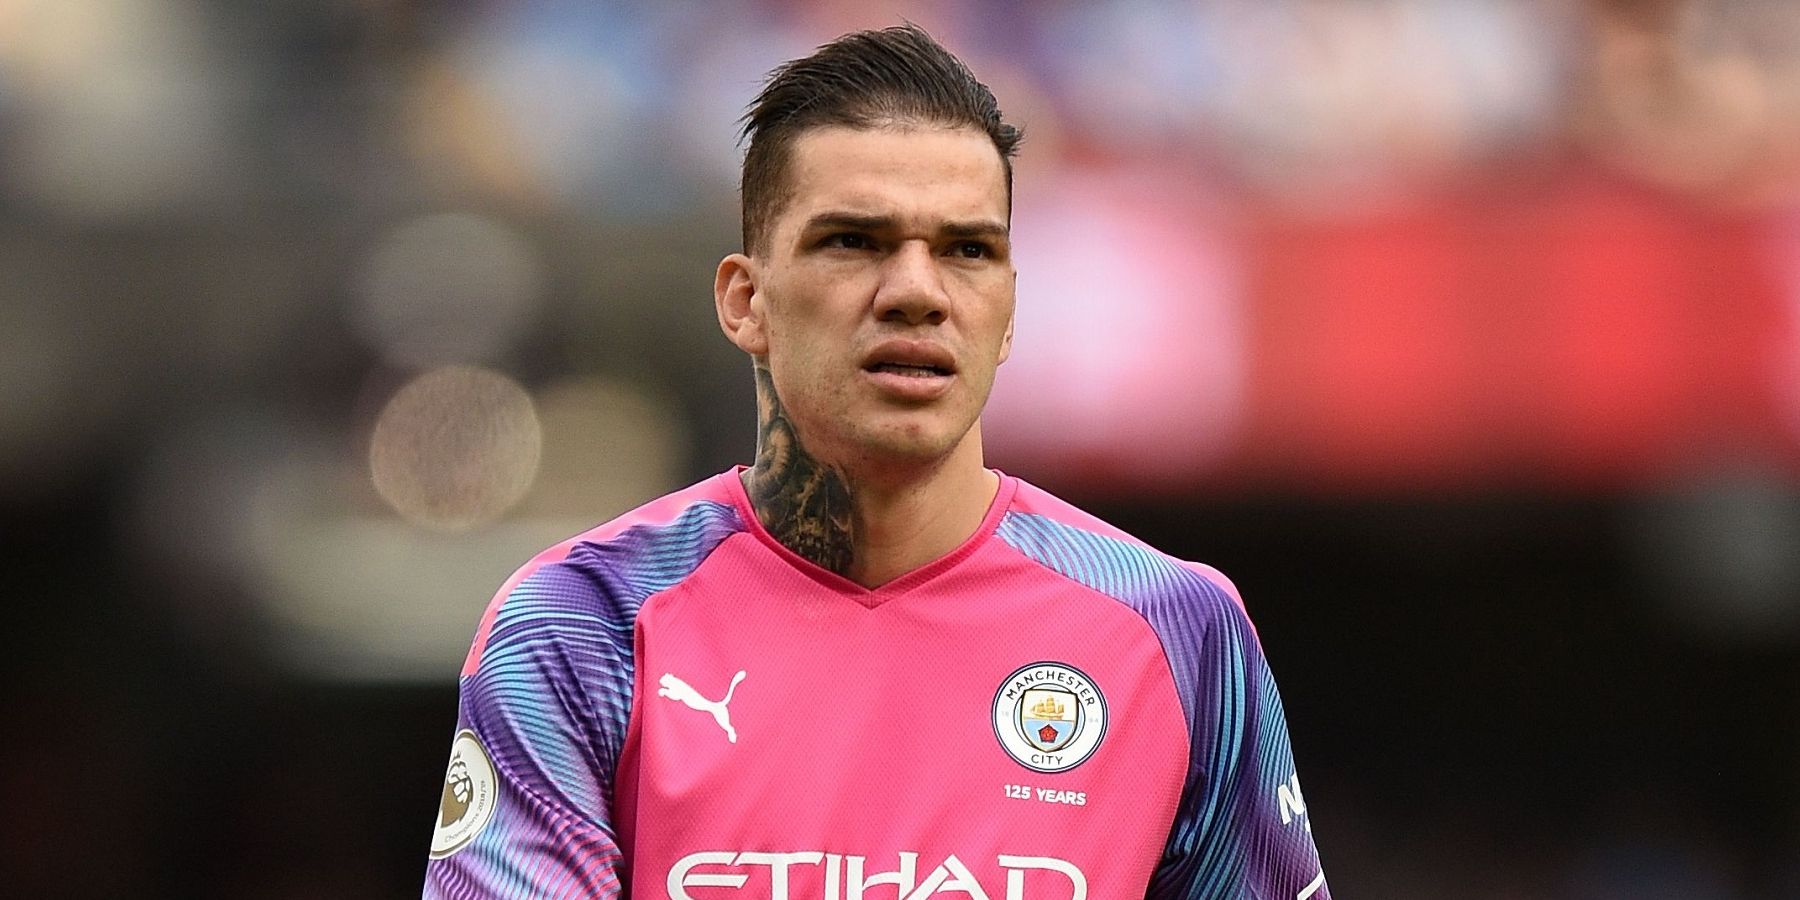 Ederson, the goalkeeper of Manchester City